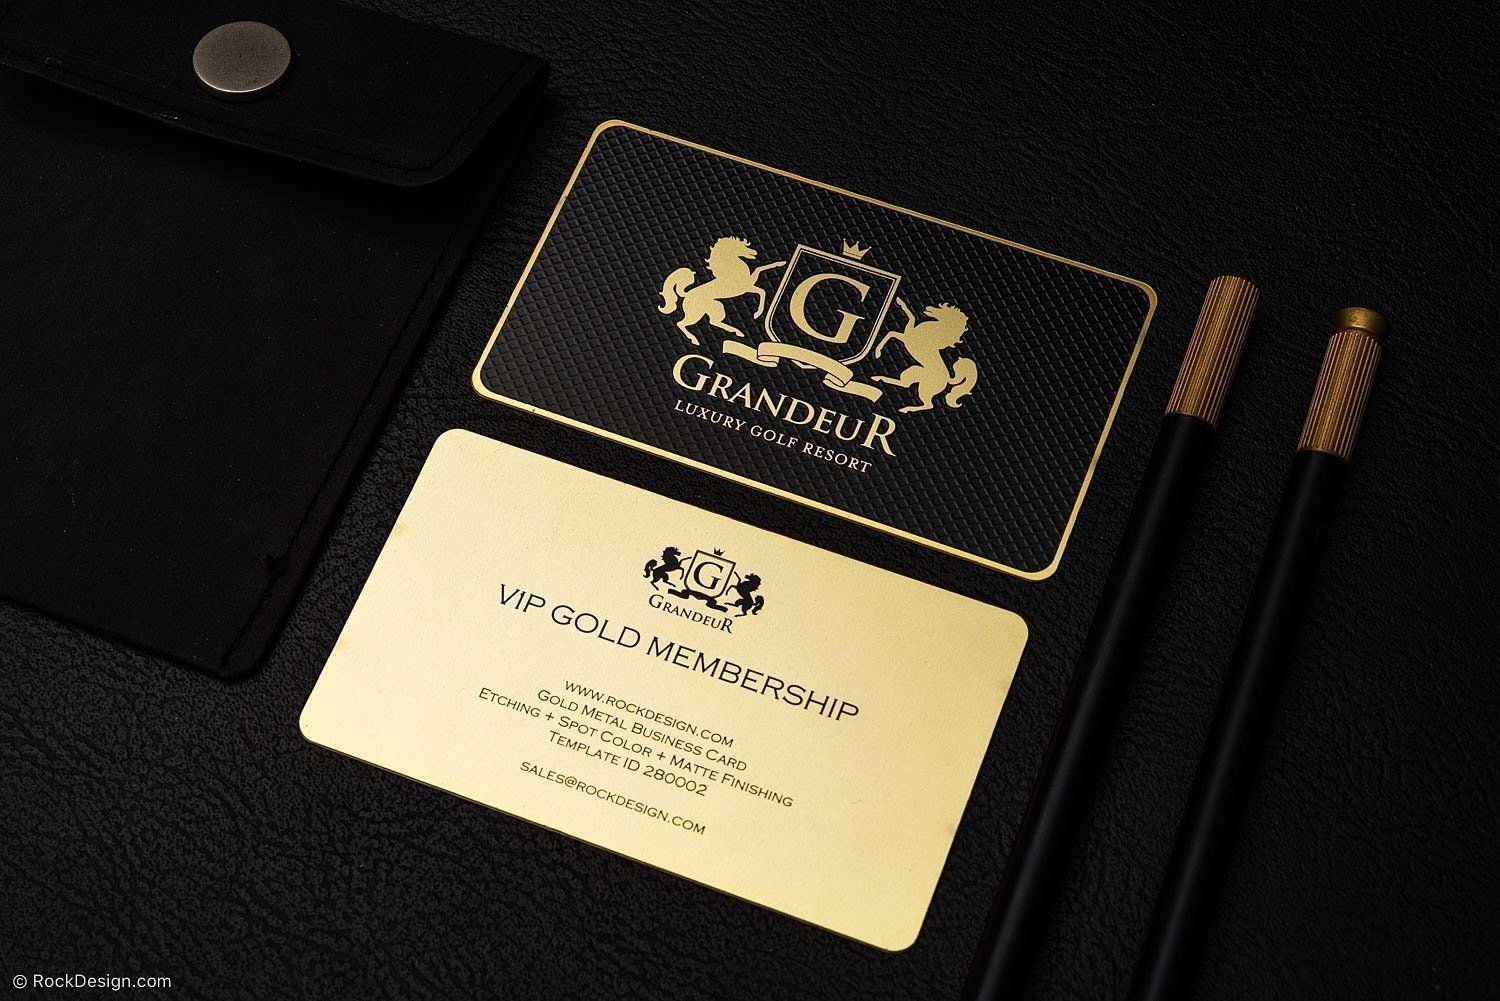 What Printing Techniques Are Used for Logos and Texts on Luxury Metal Business Cards?